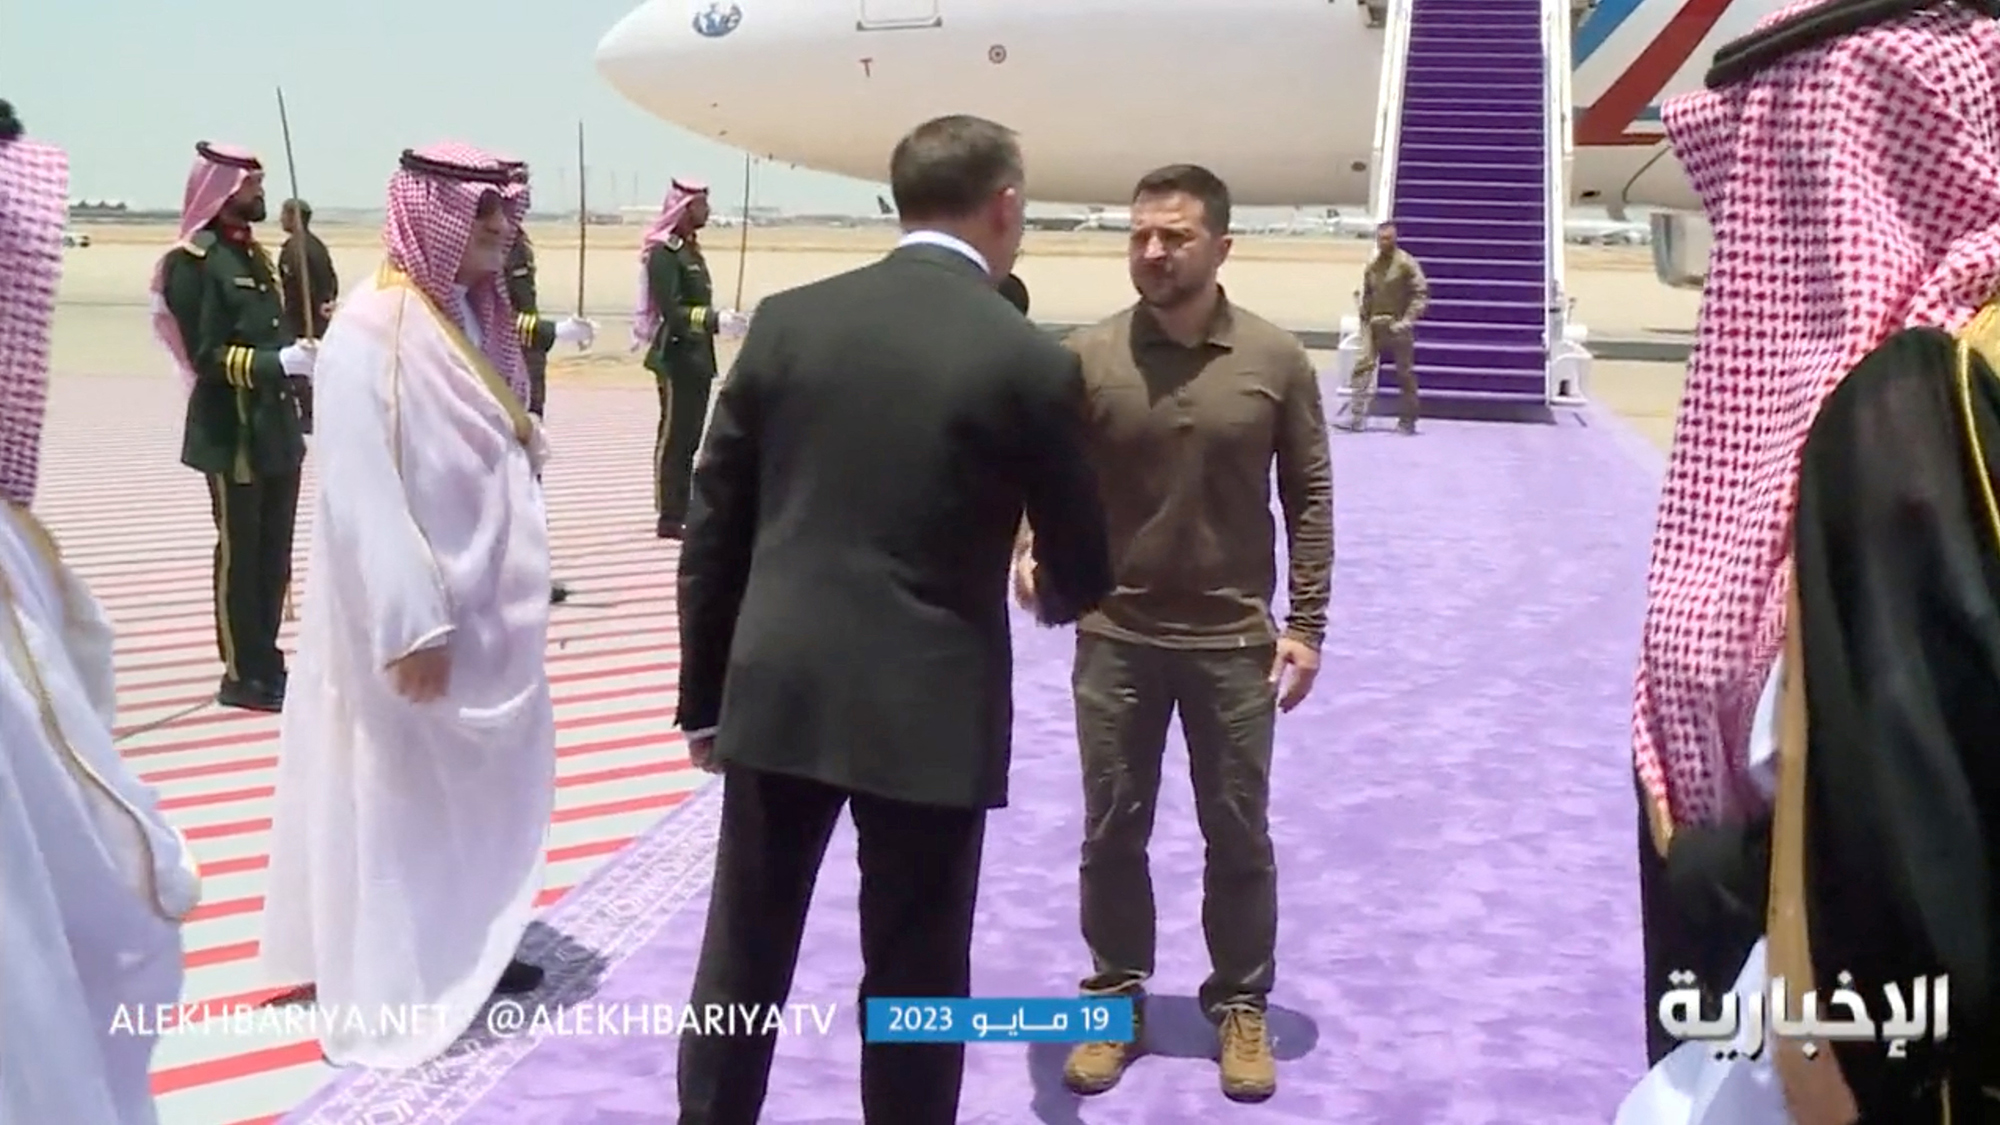 Ukrainian President Volodymyr Zelensky is welcomed as he arrives ahead of the Arab League summit, in Jeddah, Saudi Arabia in this still image obtained from a video on May 19.